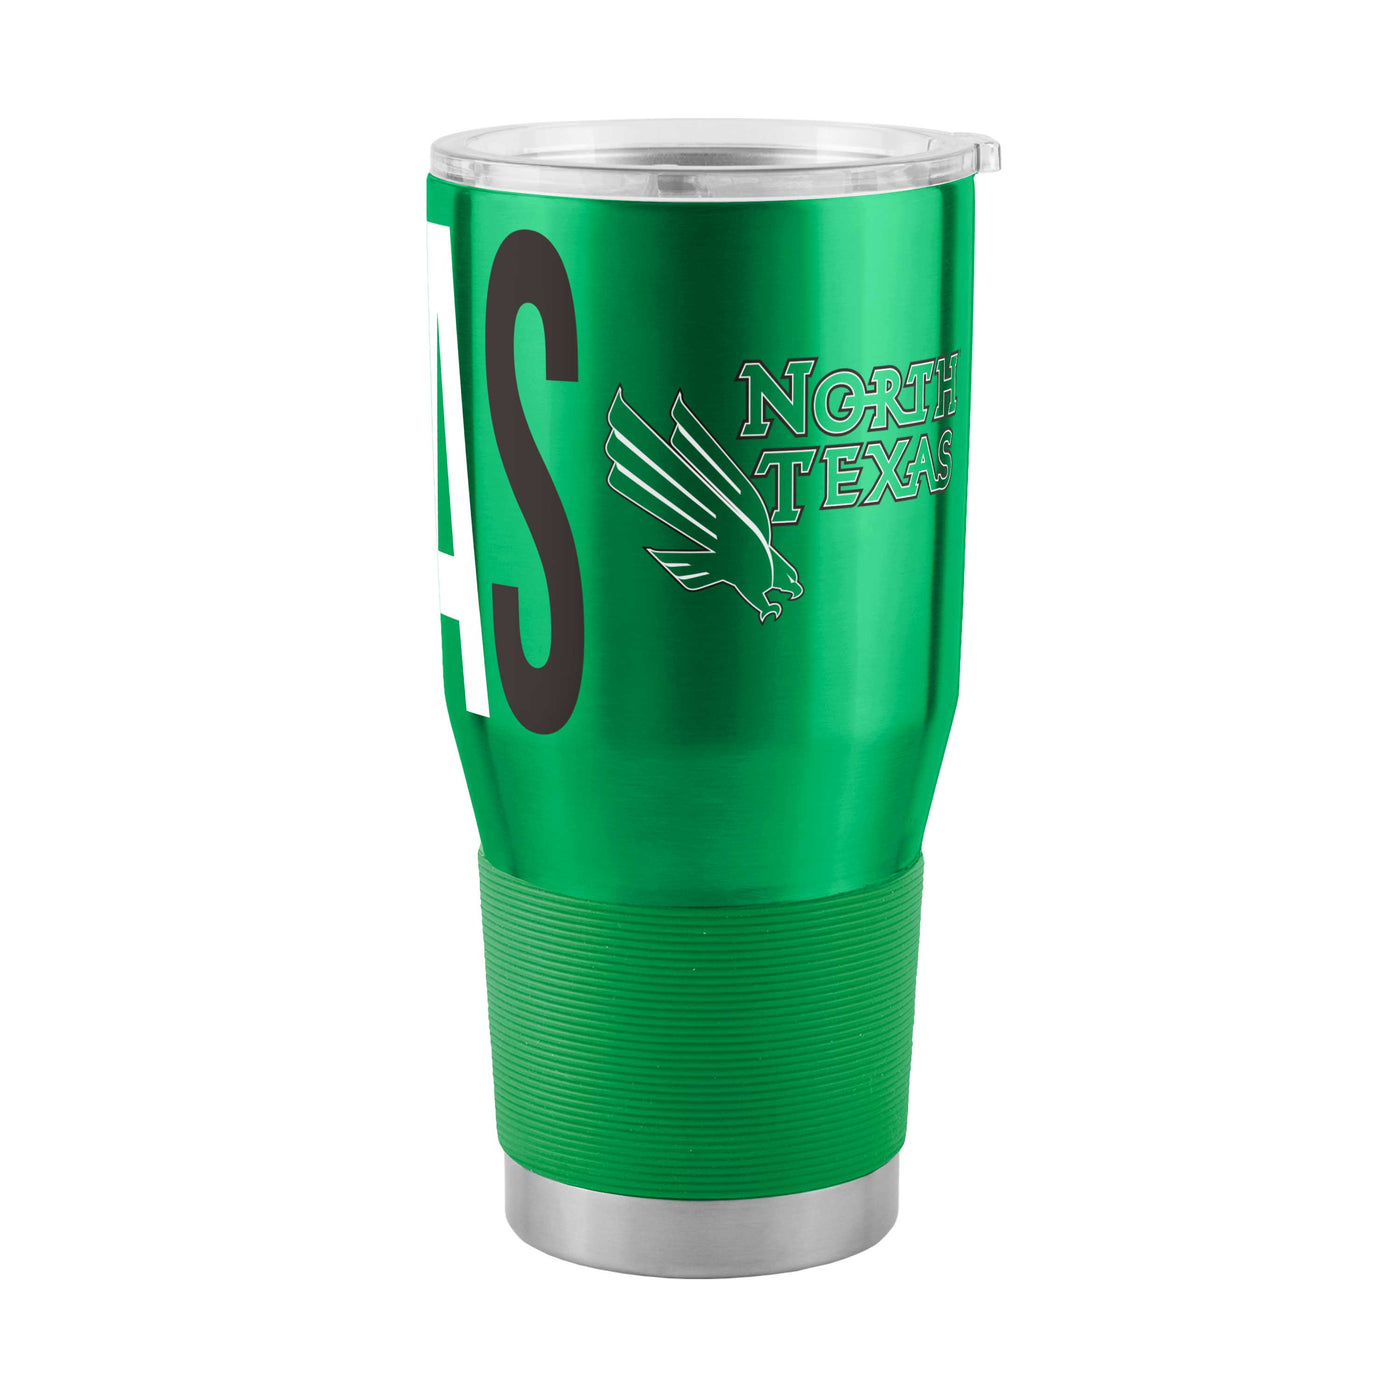 North Texas 30oz Overtime Stainless Steel Tumbler